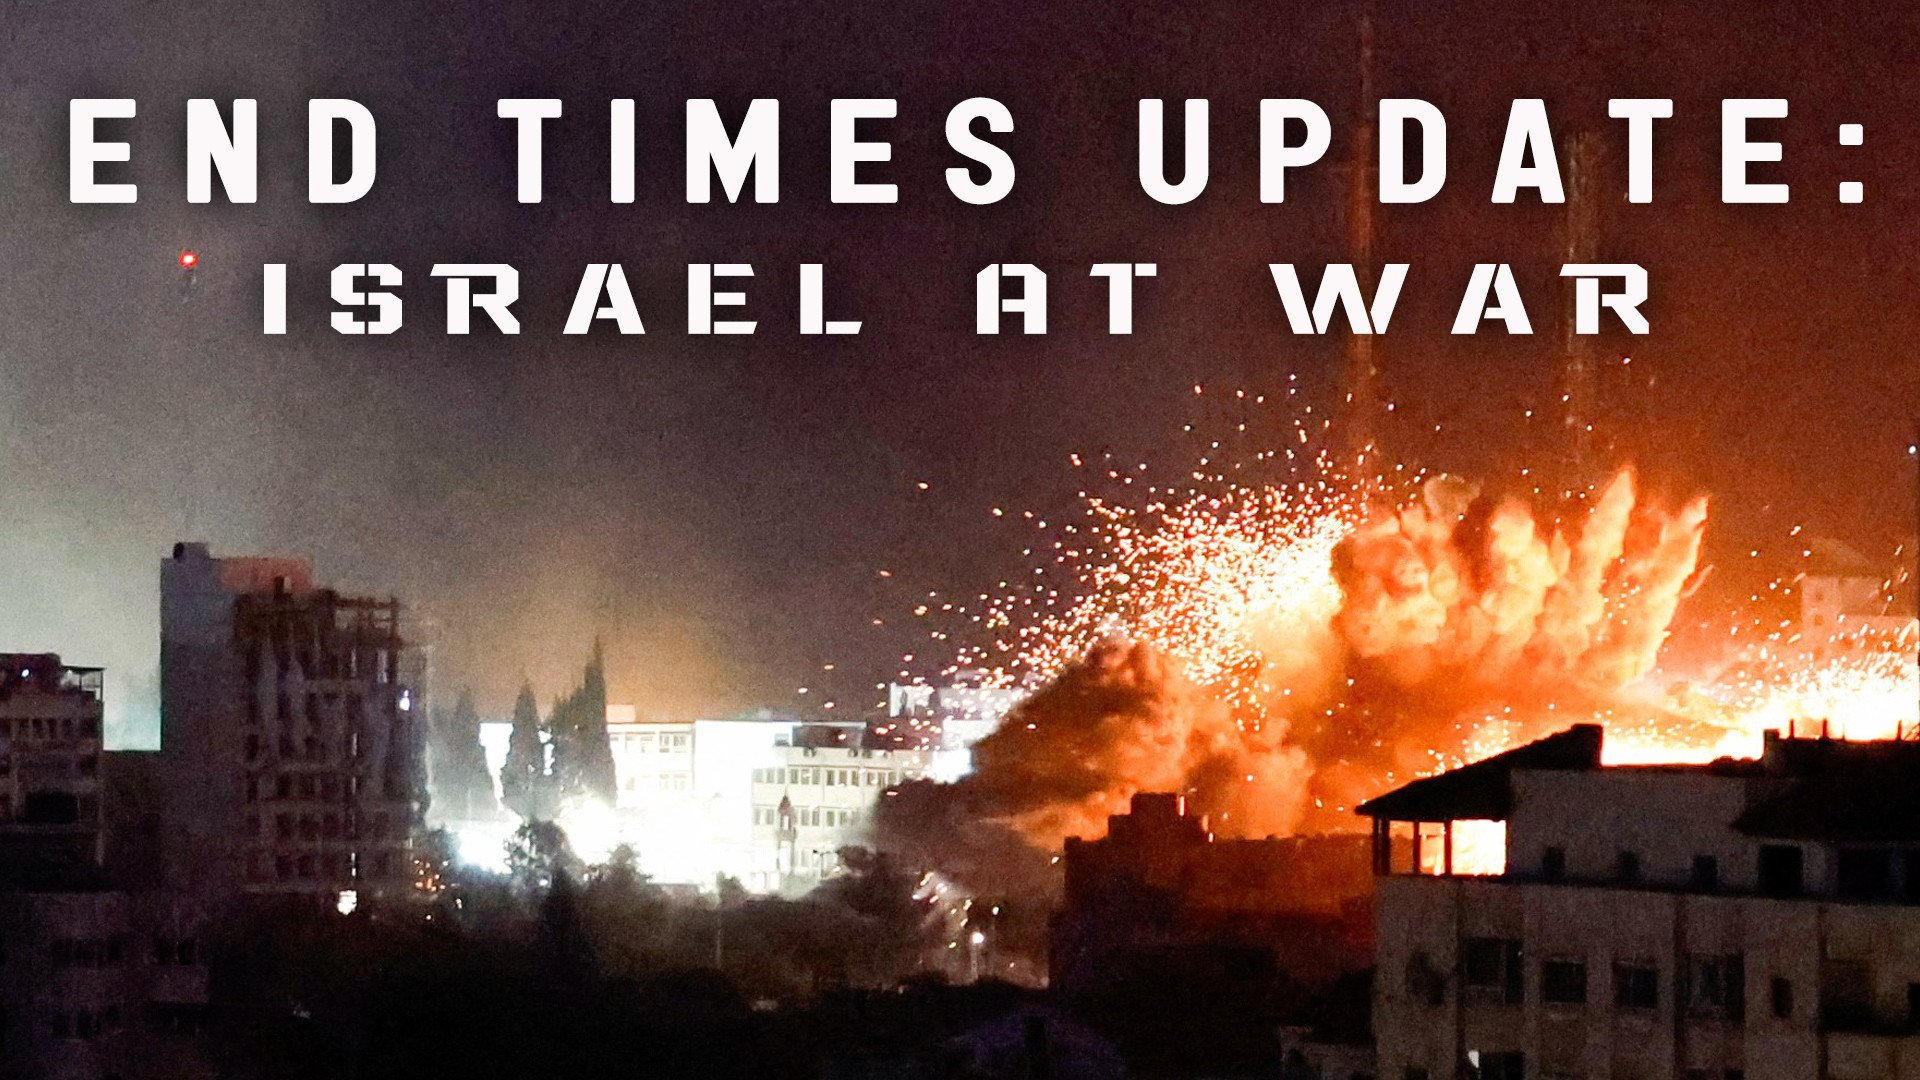 sermon image for End Times Update: Israel At War